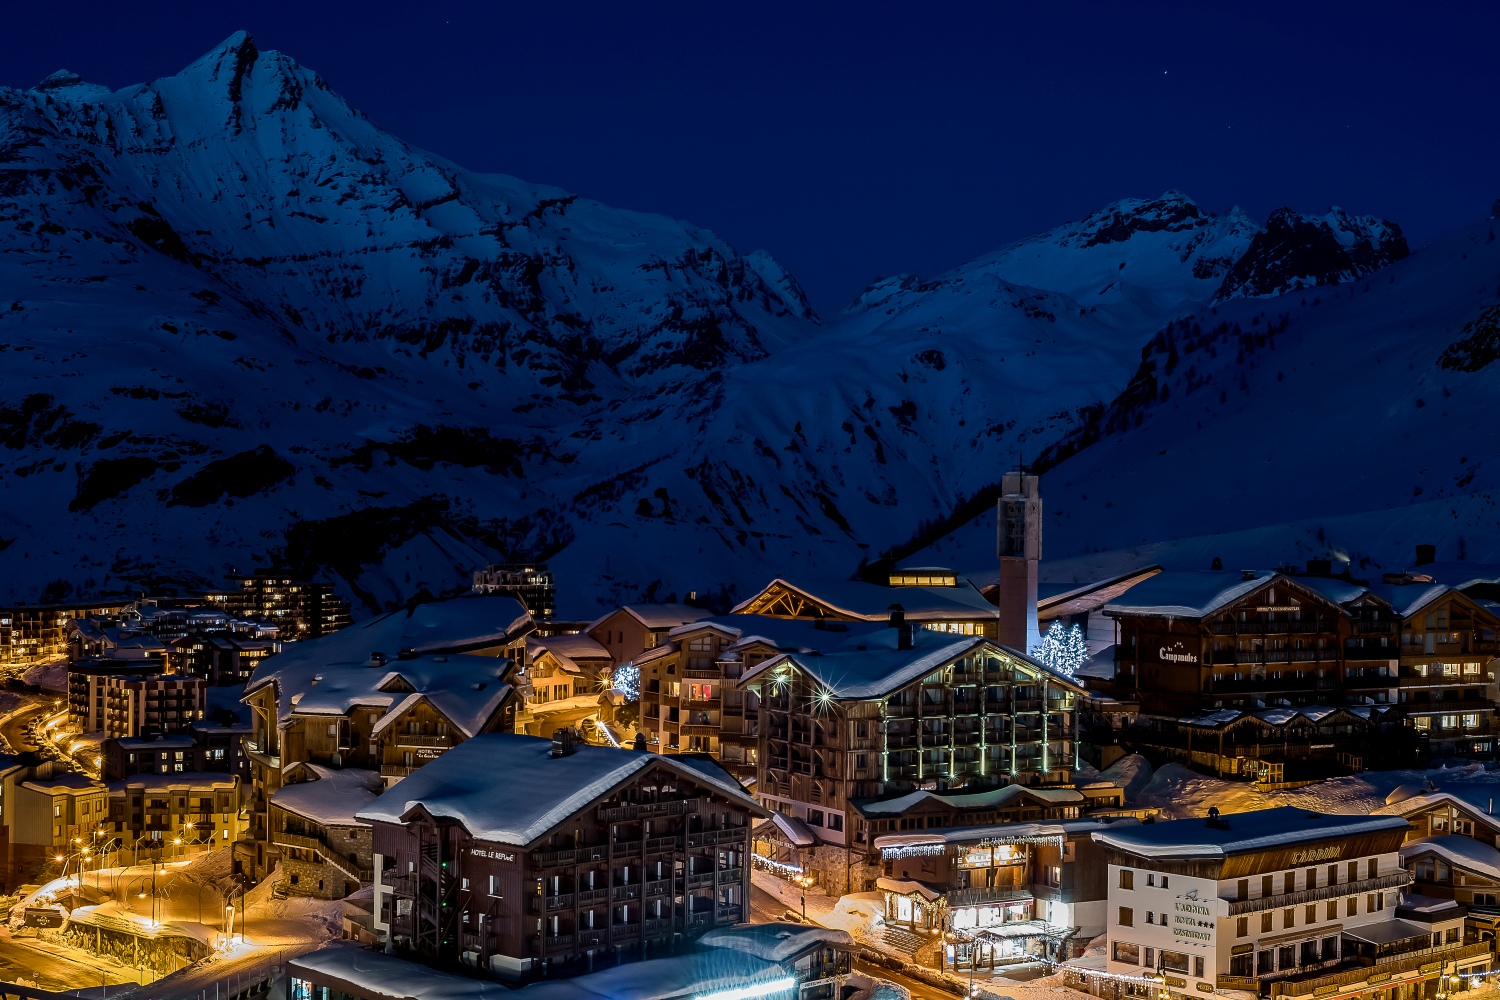 Tignes France by night CREDIT andyparant